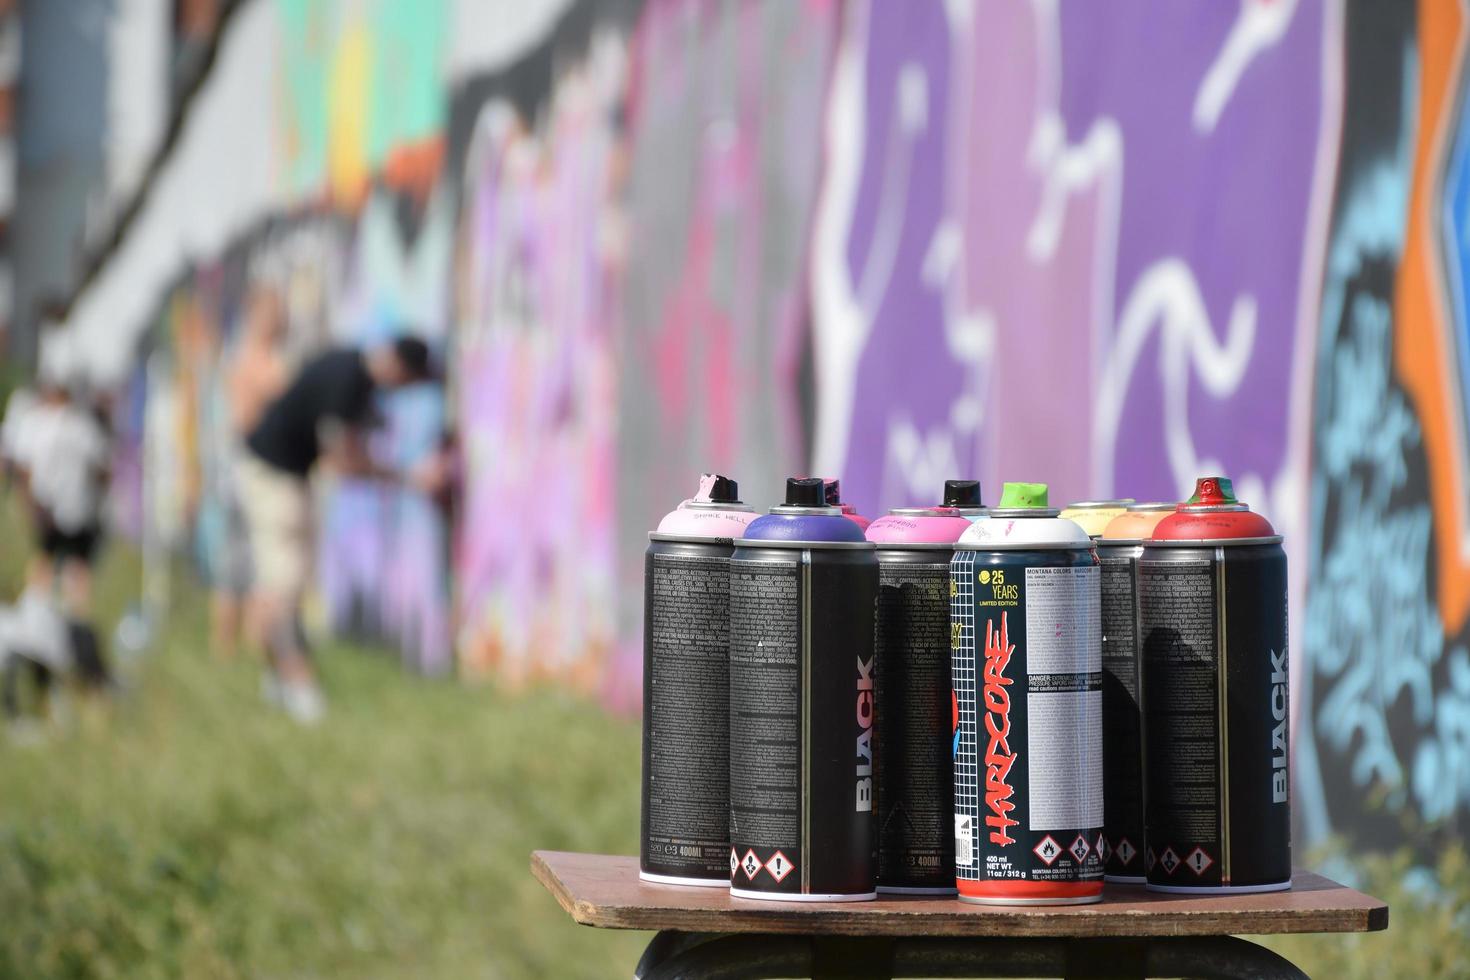 KHARKOV. UKRAINE - MAY 2, 2022 Used Montana black and hardcore aerosol spray cans against graffiti paintings. MTN or Montana-cans is manufacturer of high pressure spray paint goods photo